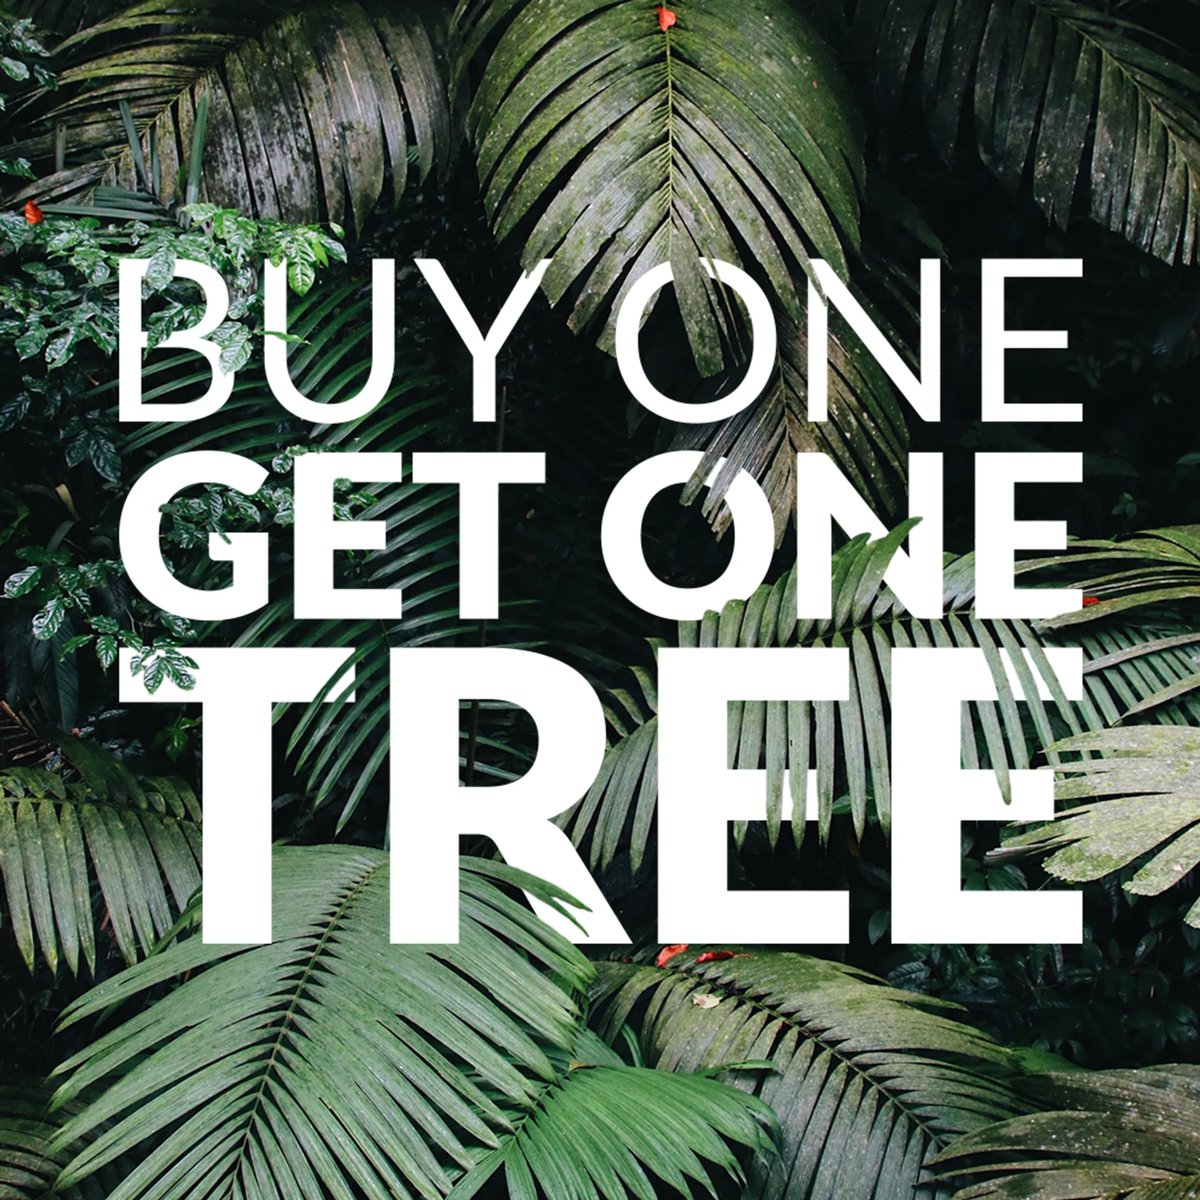 Our favourite promotion is on the way. 👏From 9am this Thursday - midnight on Sunday we fund the planting of a tree for every order you make! 🌱

You can read more by visiting our blog at spiritanimalclothing.co.uk 🌳

#buyonegetonetree #plantatree #treeplanting #lovetrees #trees